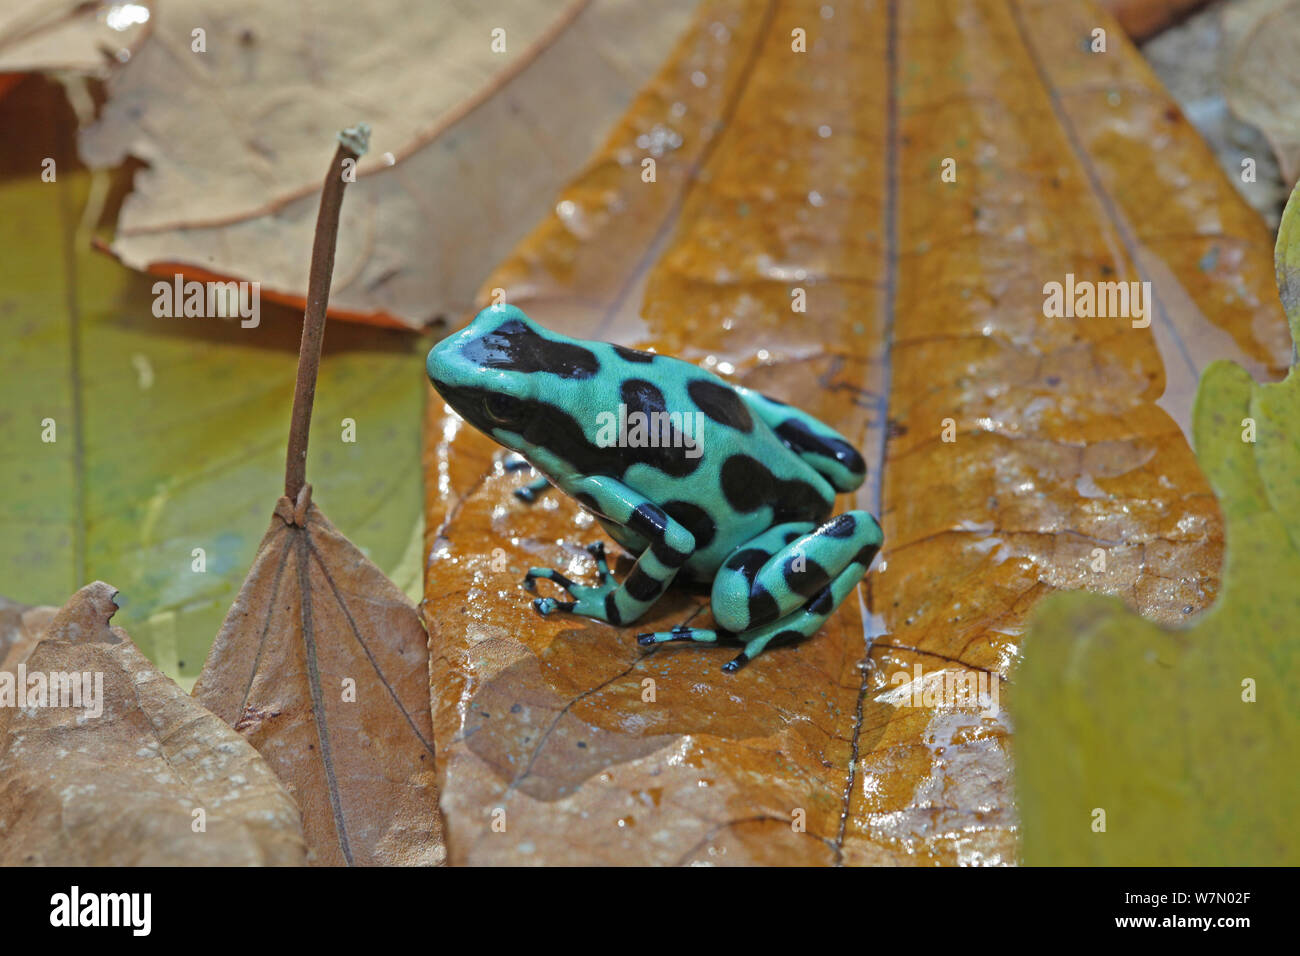 Black-and-green poison dart frog (Dendrobates auratus) in rainforest, Costa Rica Stock Photo